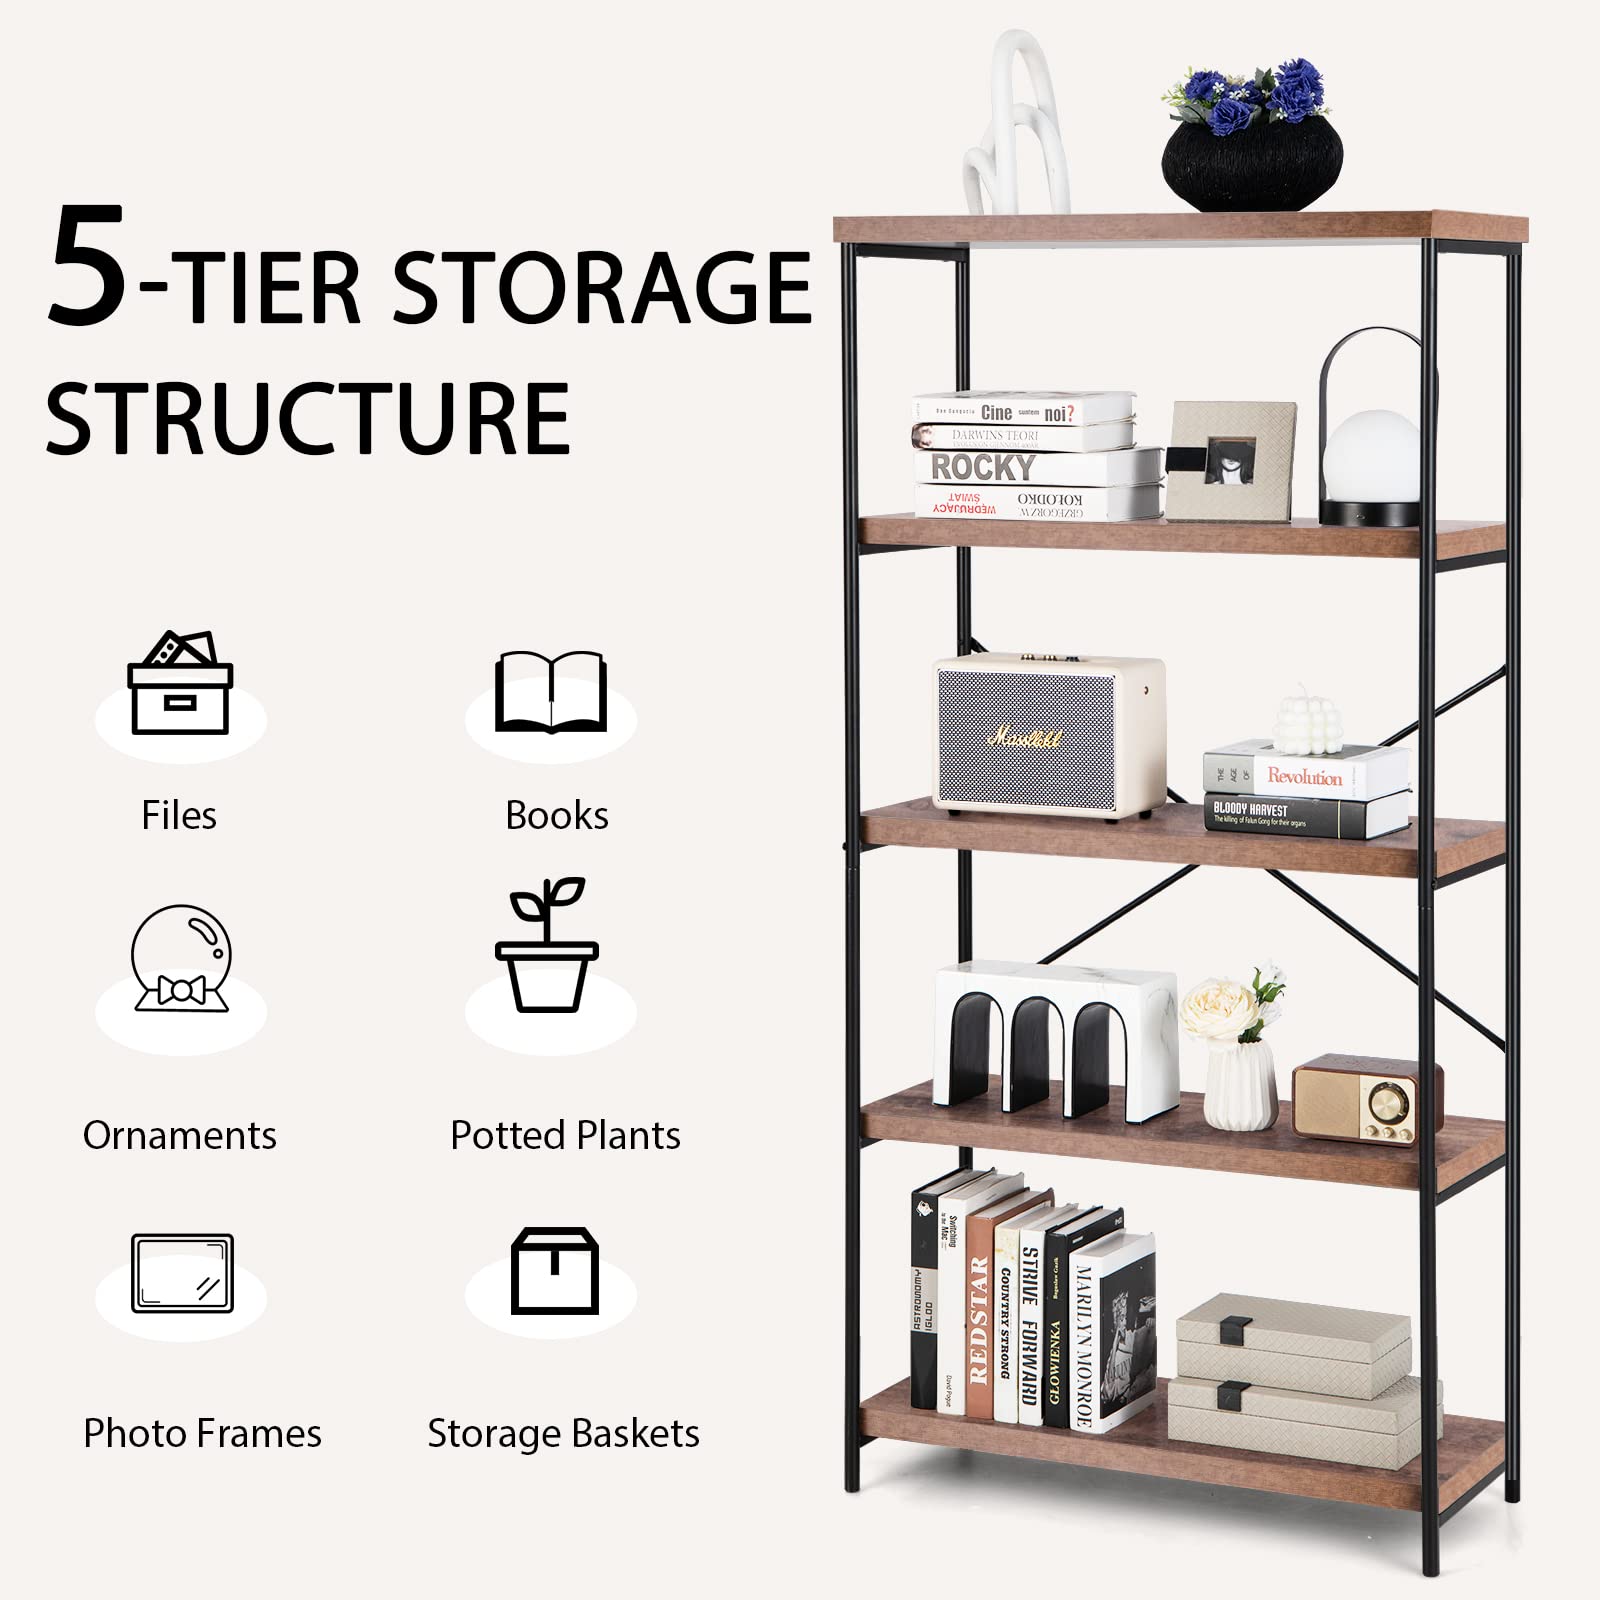 Giantex Industrial 5-Tier Wood Bookshelf - 63’’ Tall Open Storage Organizer Shelves with Anti-Tipping Device and Foot Pads